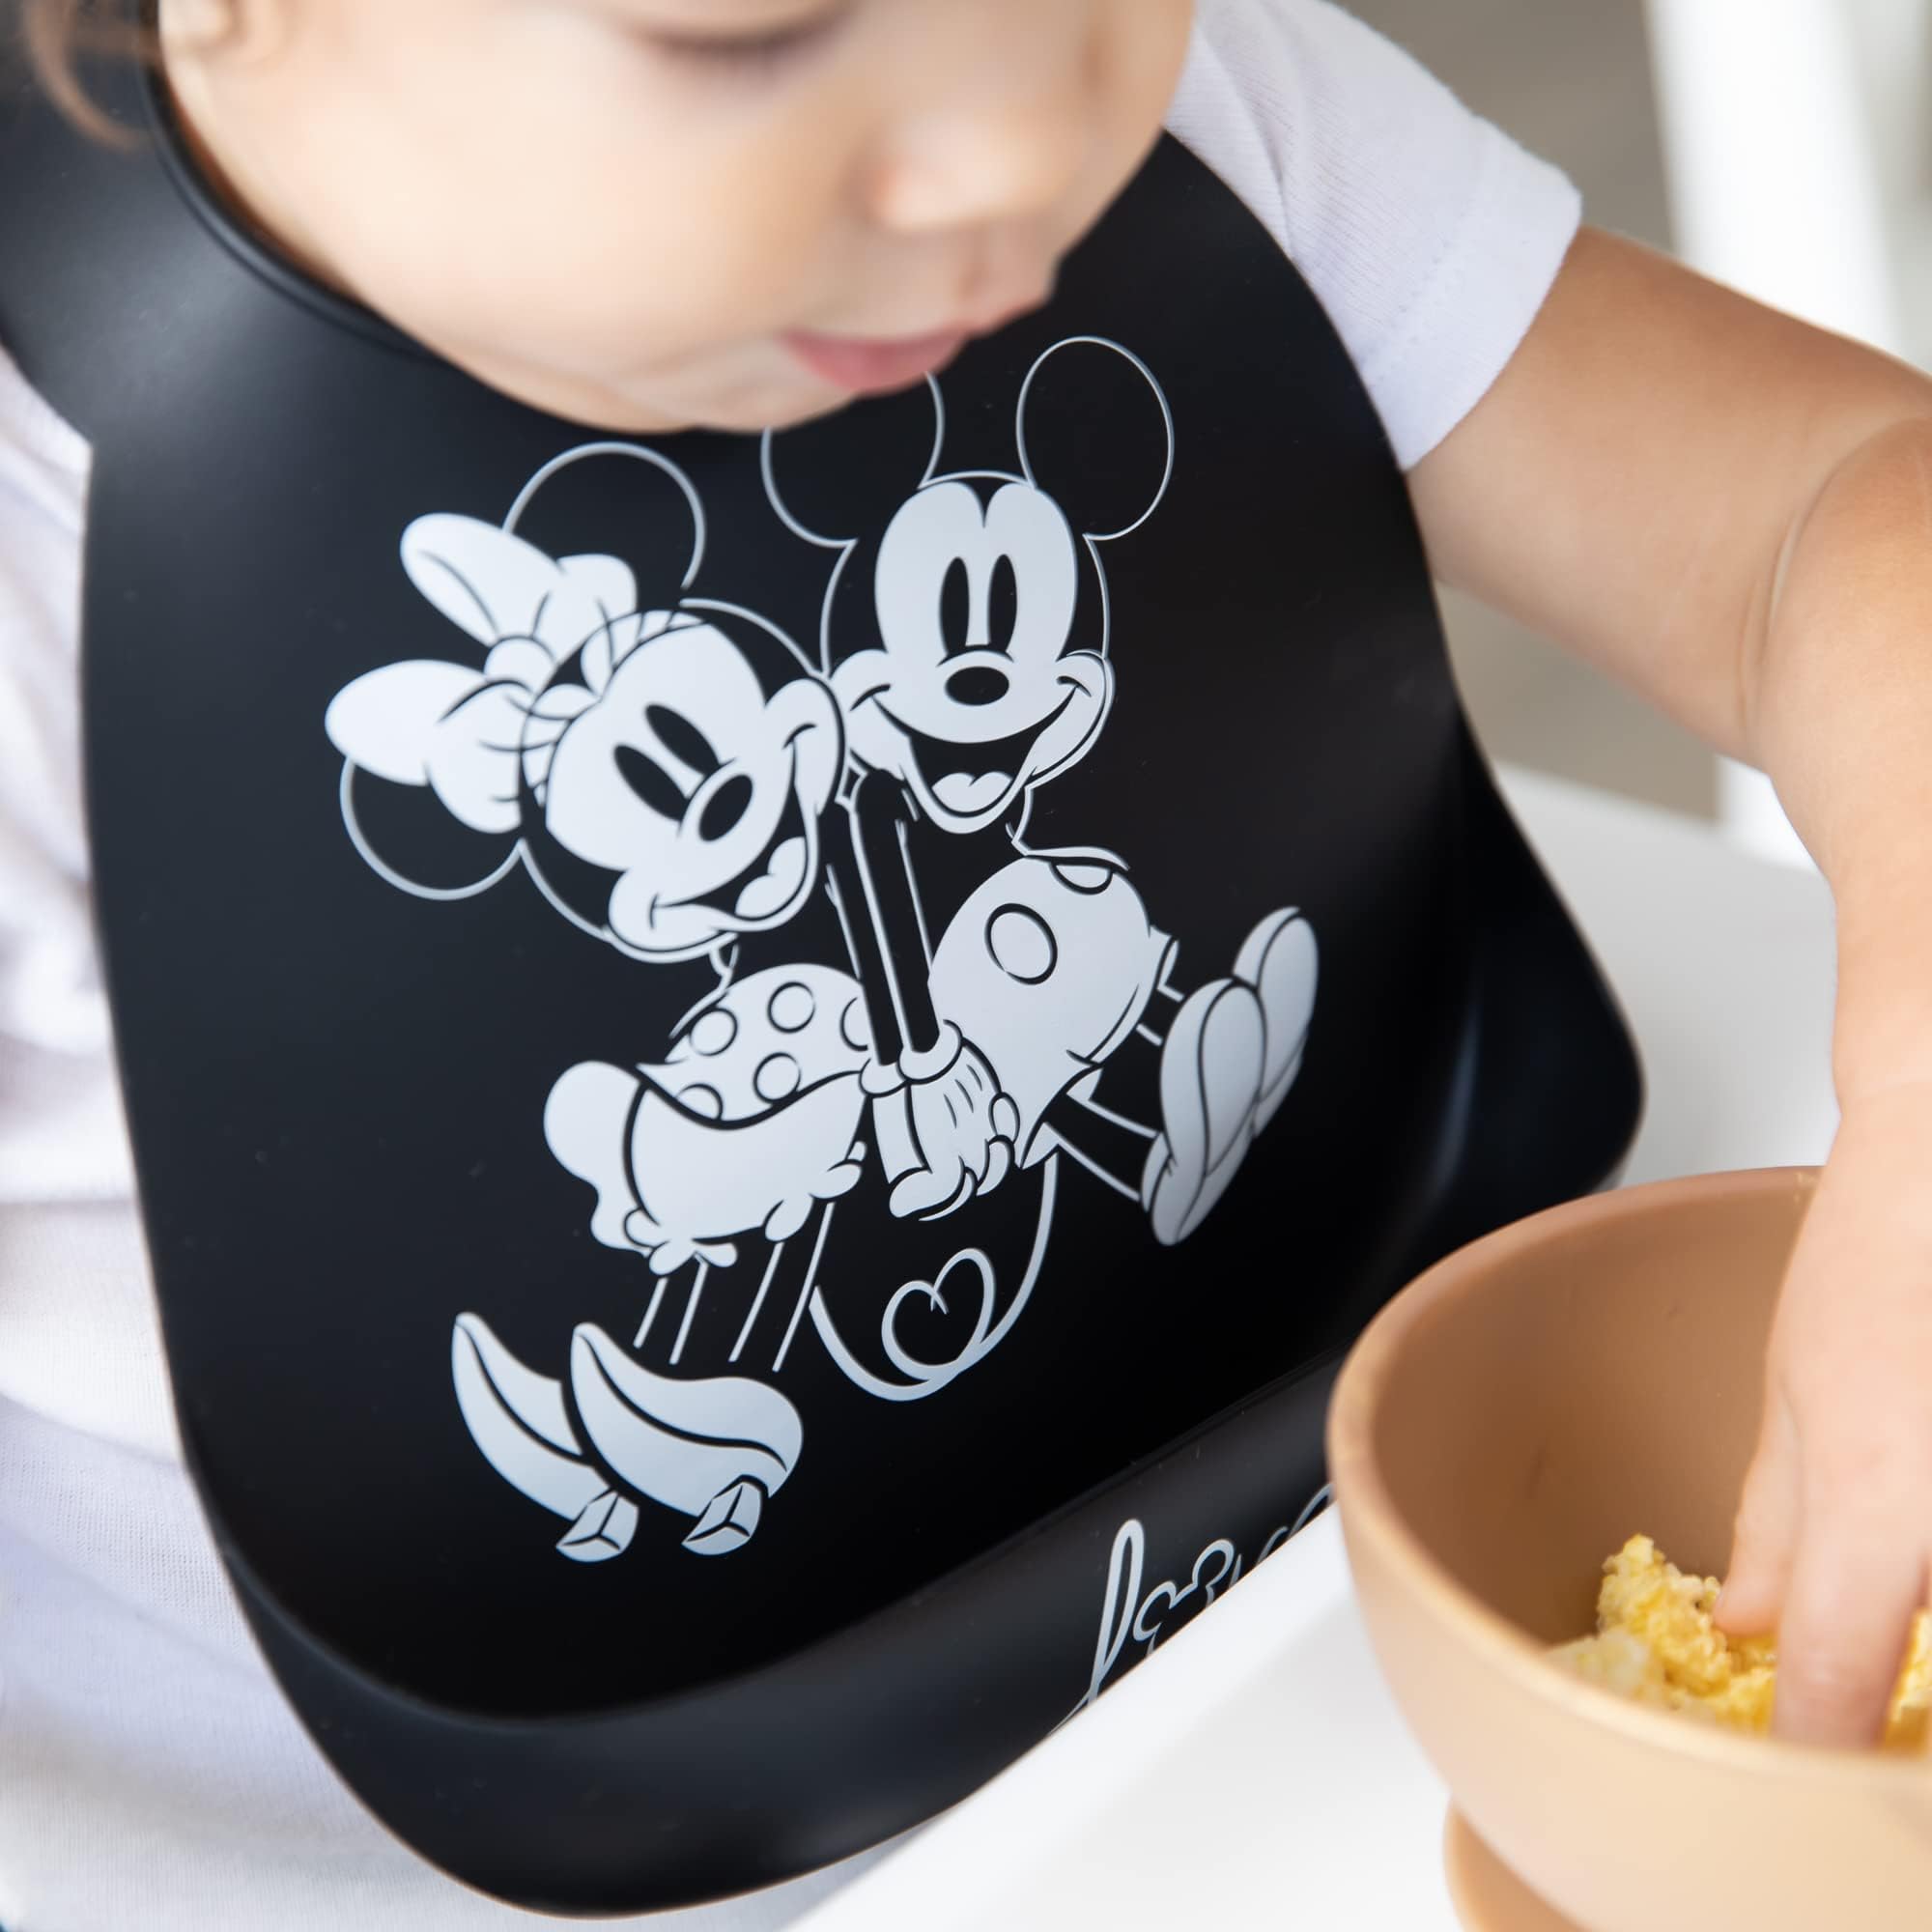 Bumkins Bibs, Silicone Pocket for Babies, Baby Bib for Girl or Boy, for 6-24 Months Up to Toddler, Essential Must Have for Eating, Feeding, Baby Led Weaning Supplies, Mess Saving, Mickey and Minnie